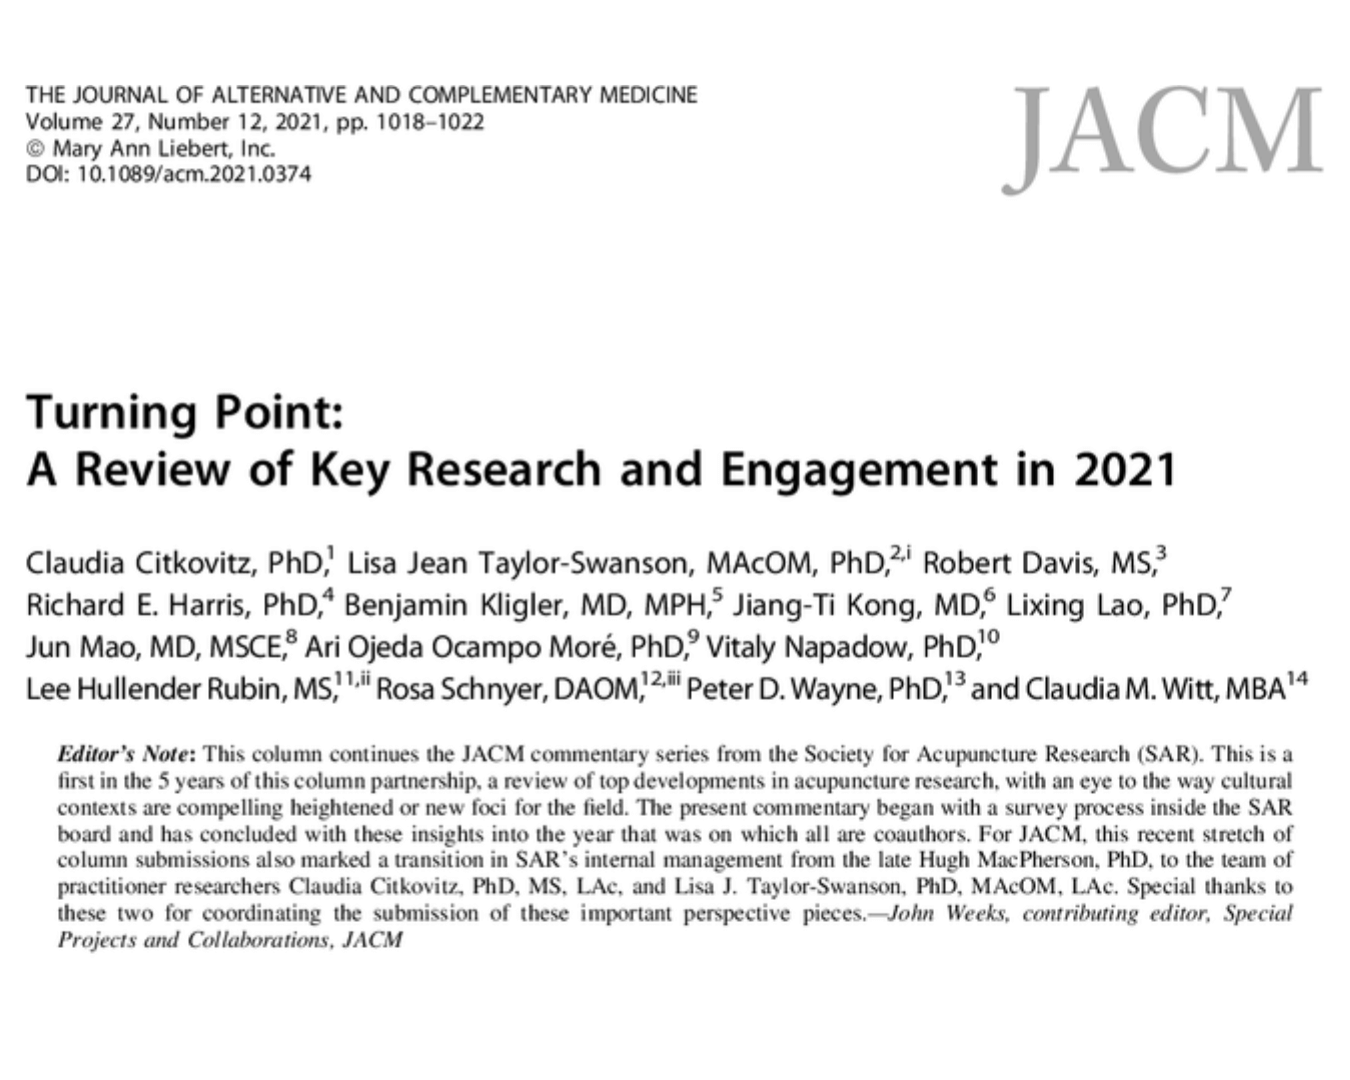 Turning Point: A Review of Key Research and Engagement in 2021